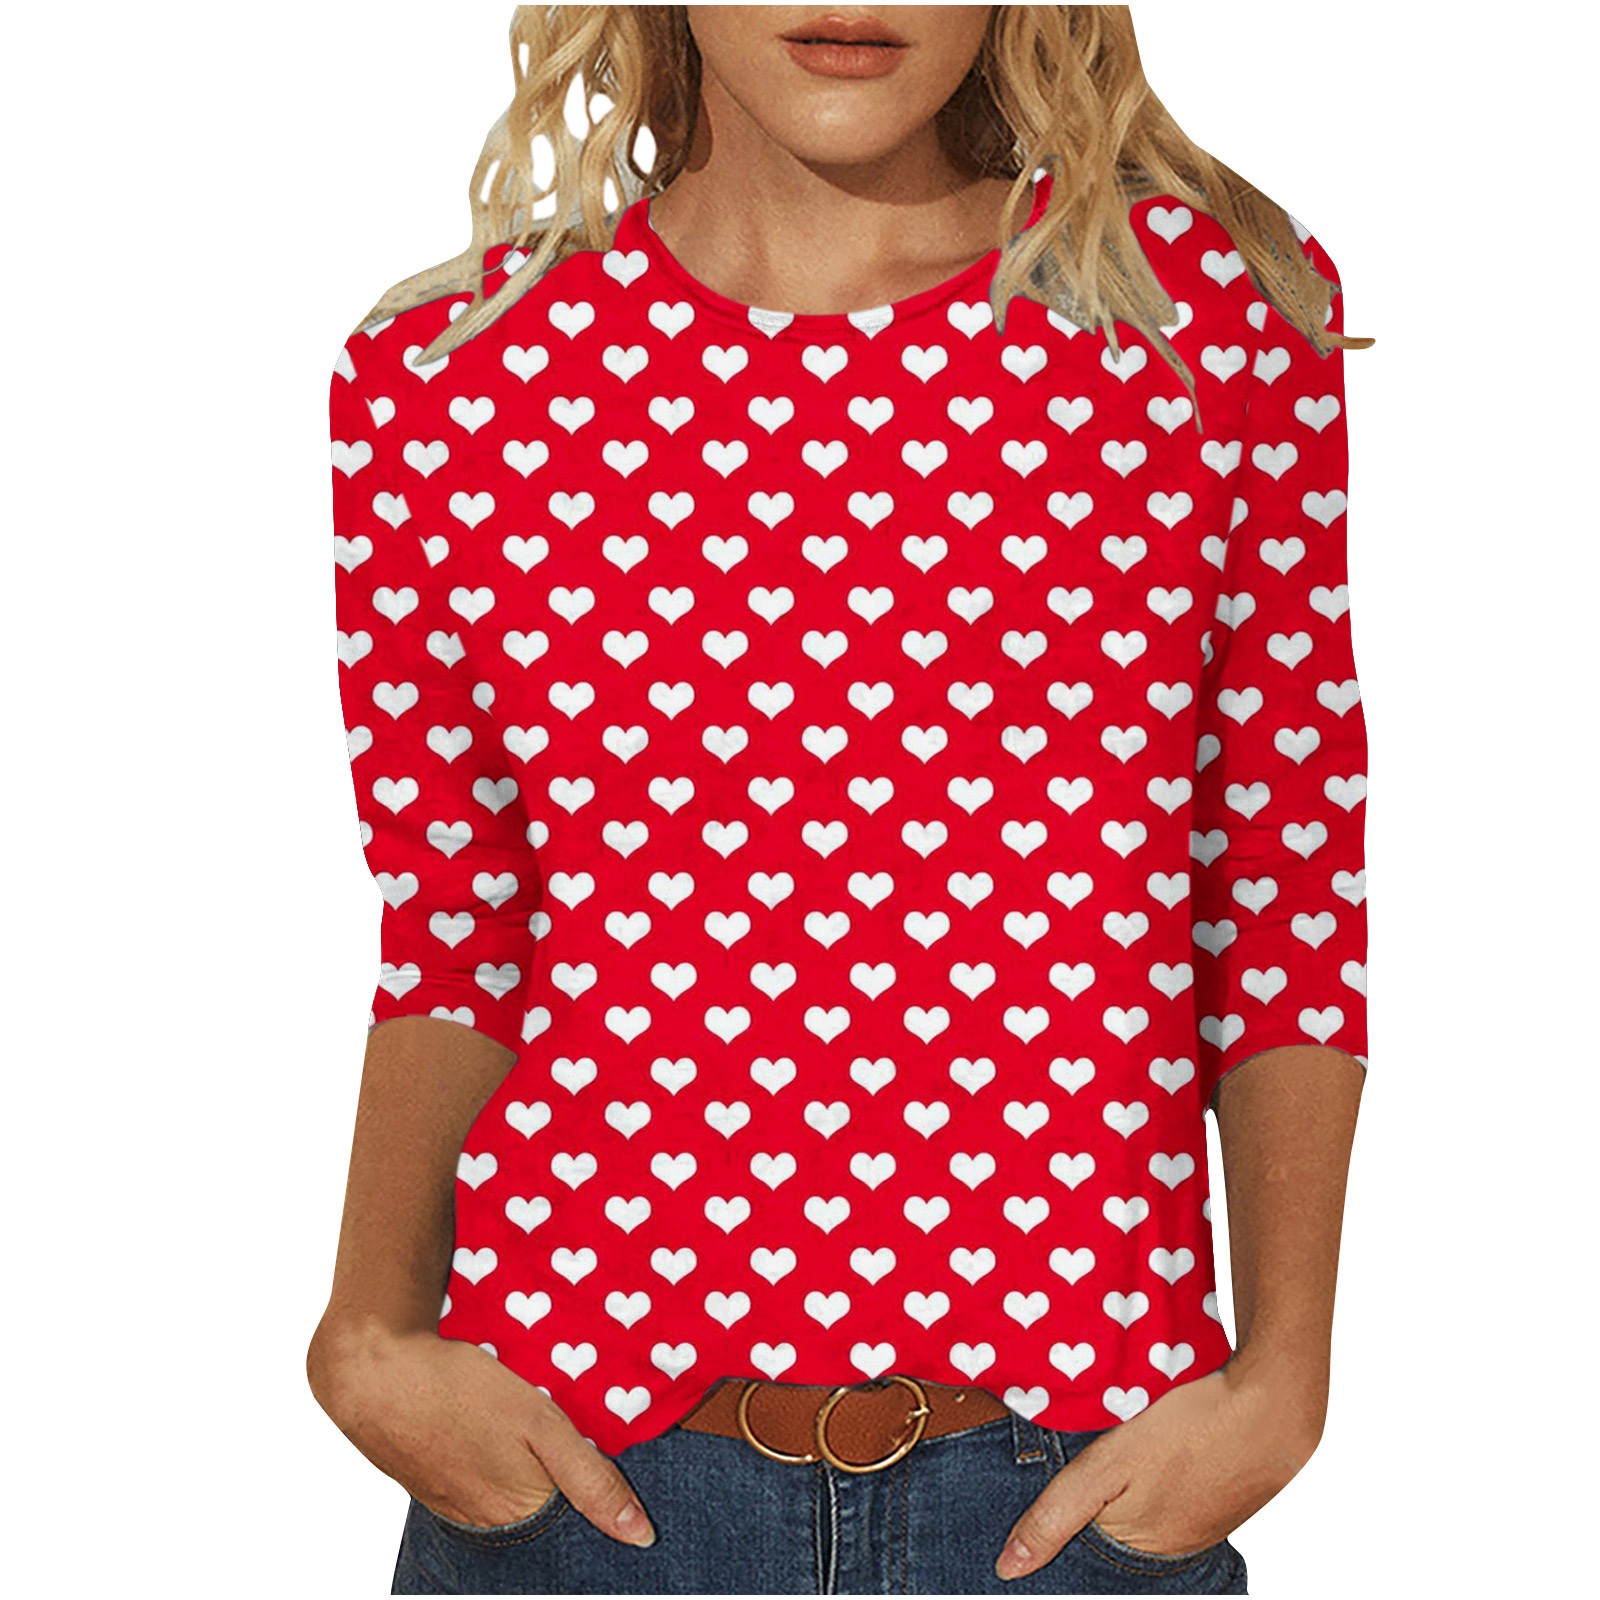 DDAPJ pyju Valentine's Day Gifts for Her, Love Heart Print 3/4 Sleeve T ...